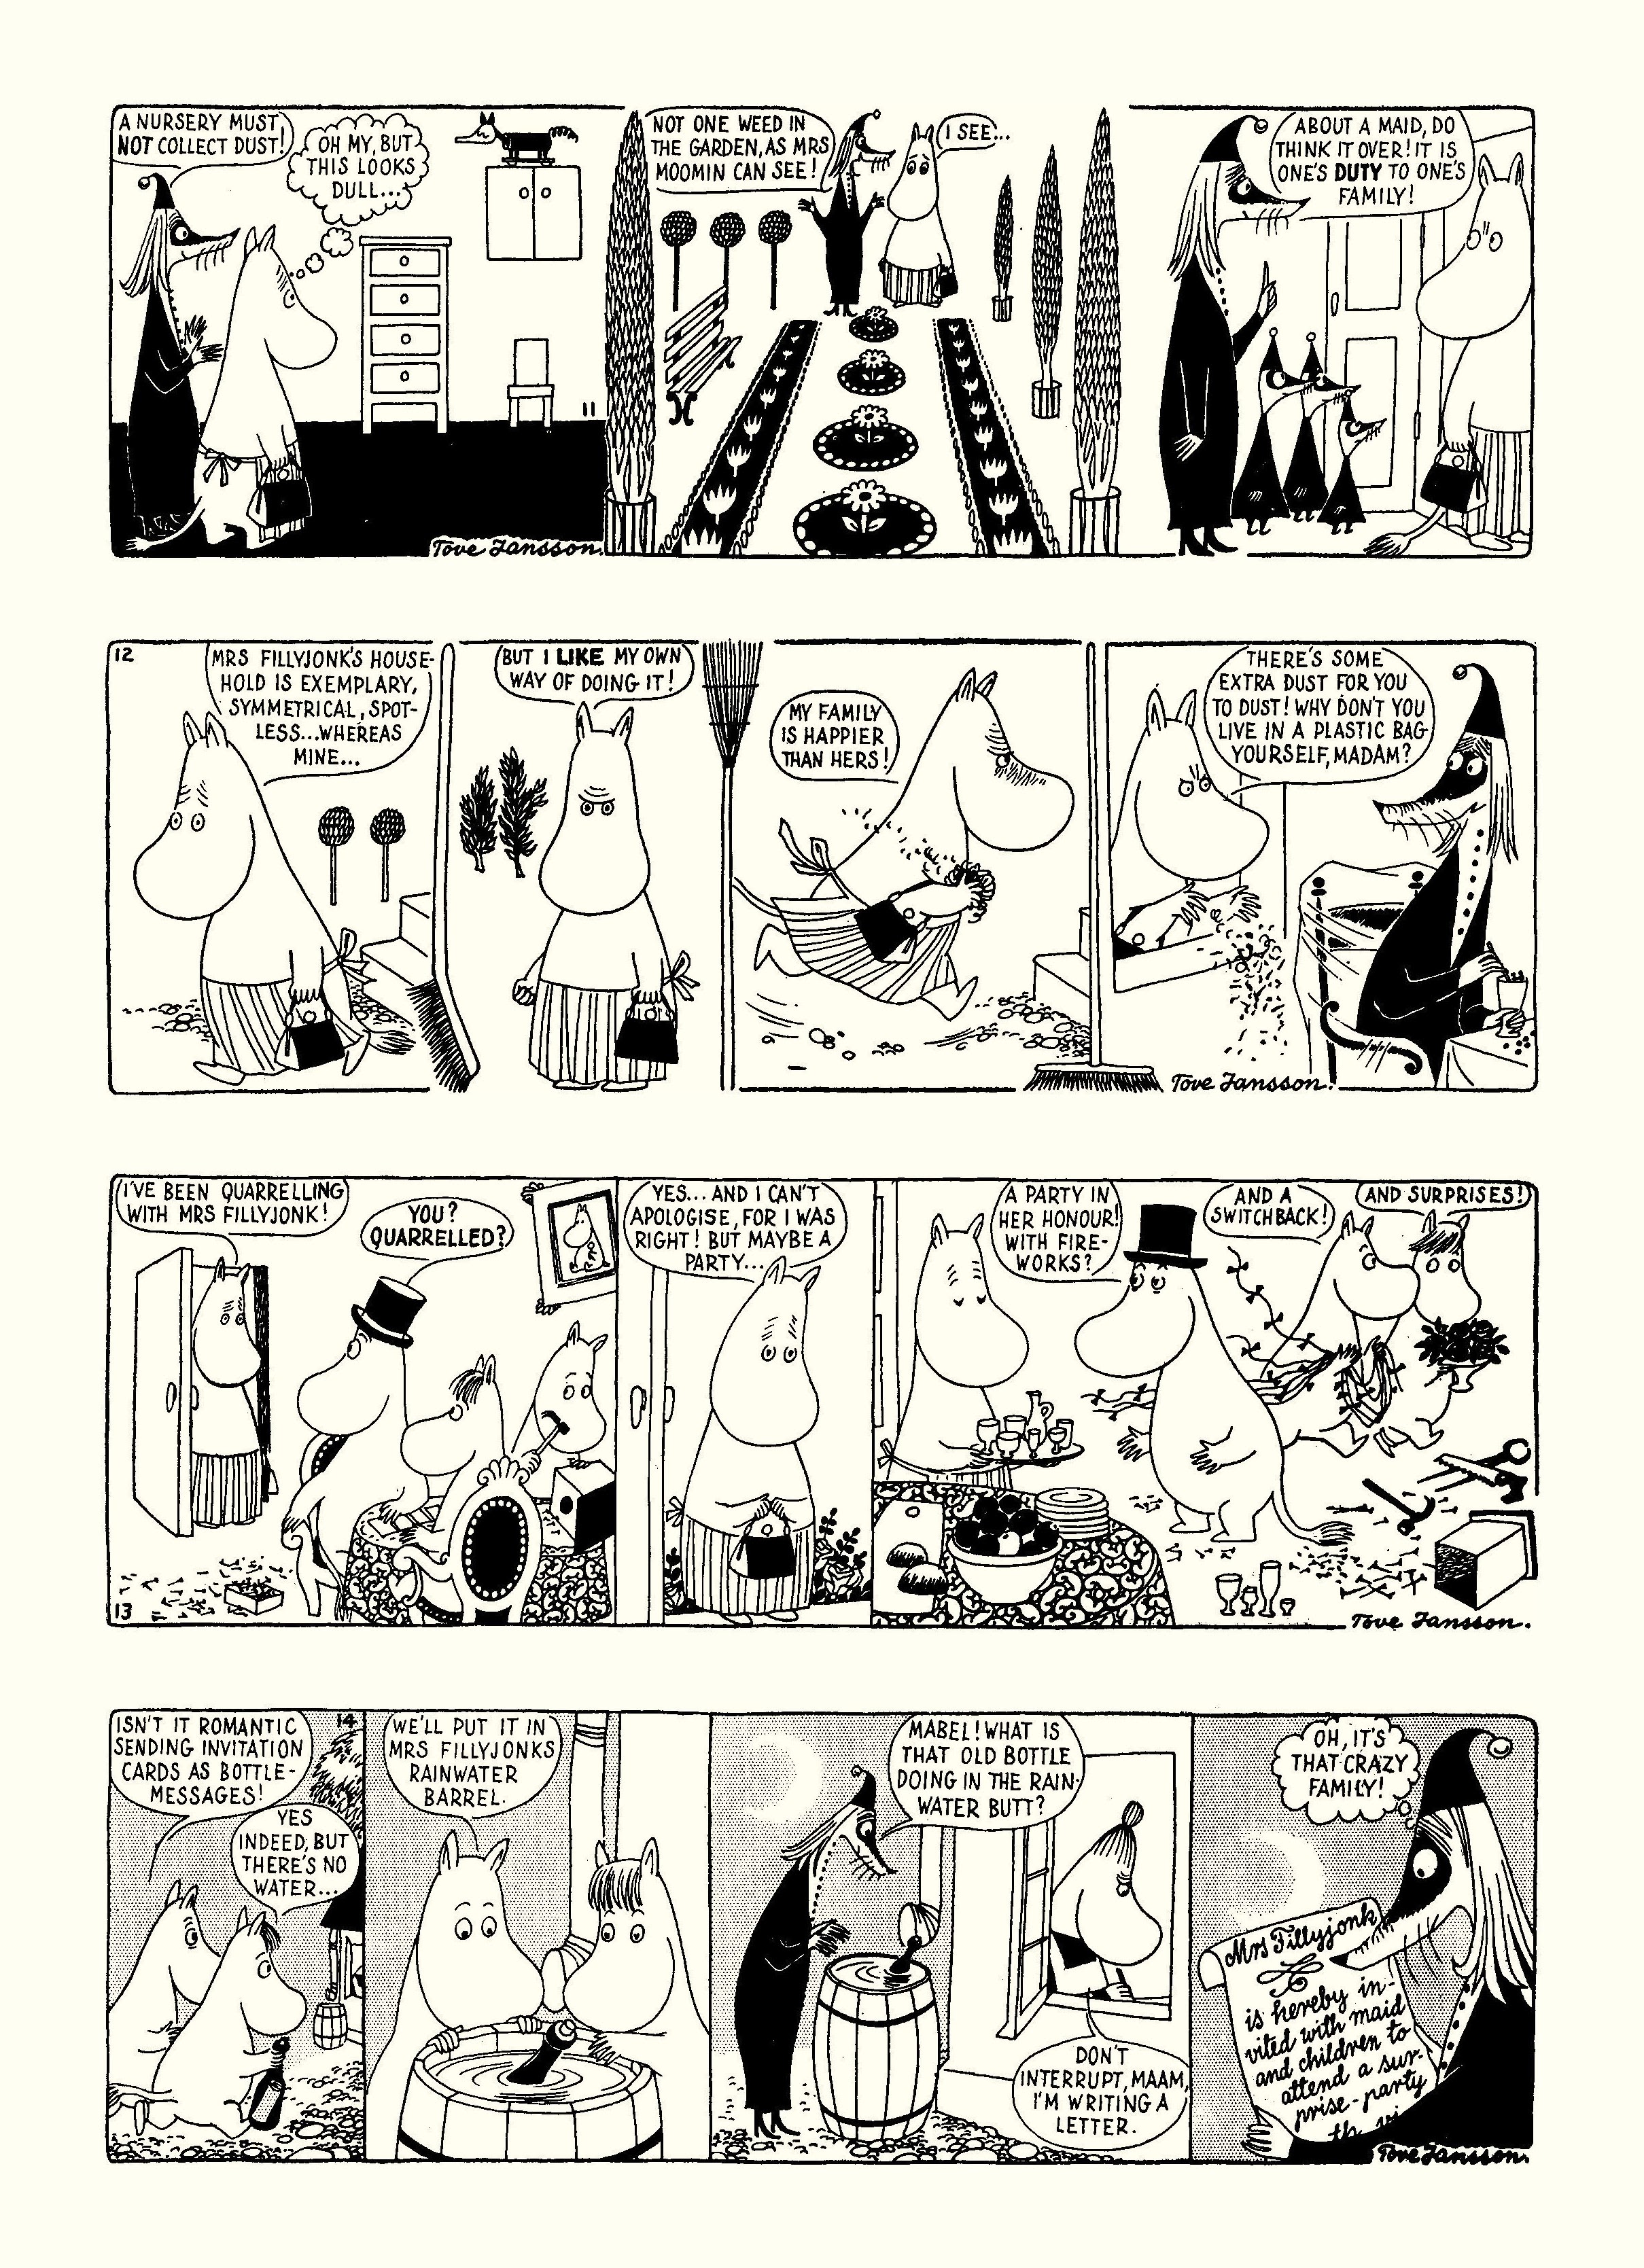 Read online Moomin: The Complete Tove Jansson Comic Strip comic -  Issue # TPB 2 - 30